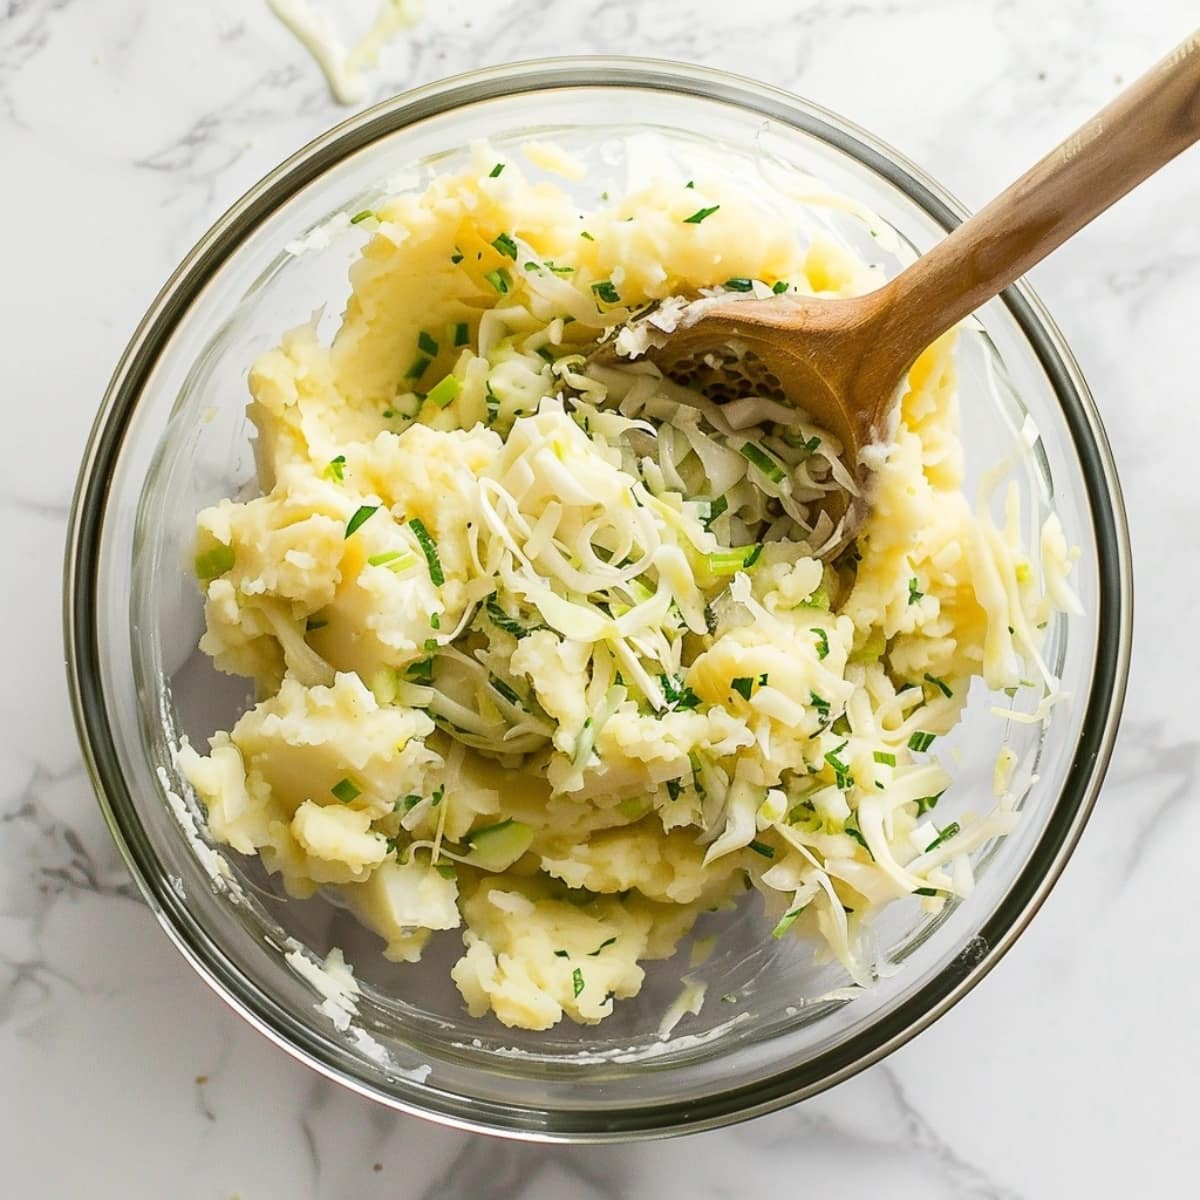 Mashed potato and cabbage mixture in a glass bowl.